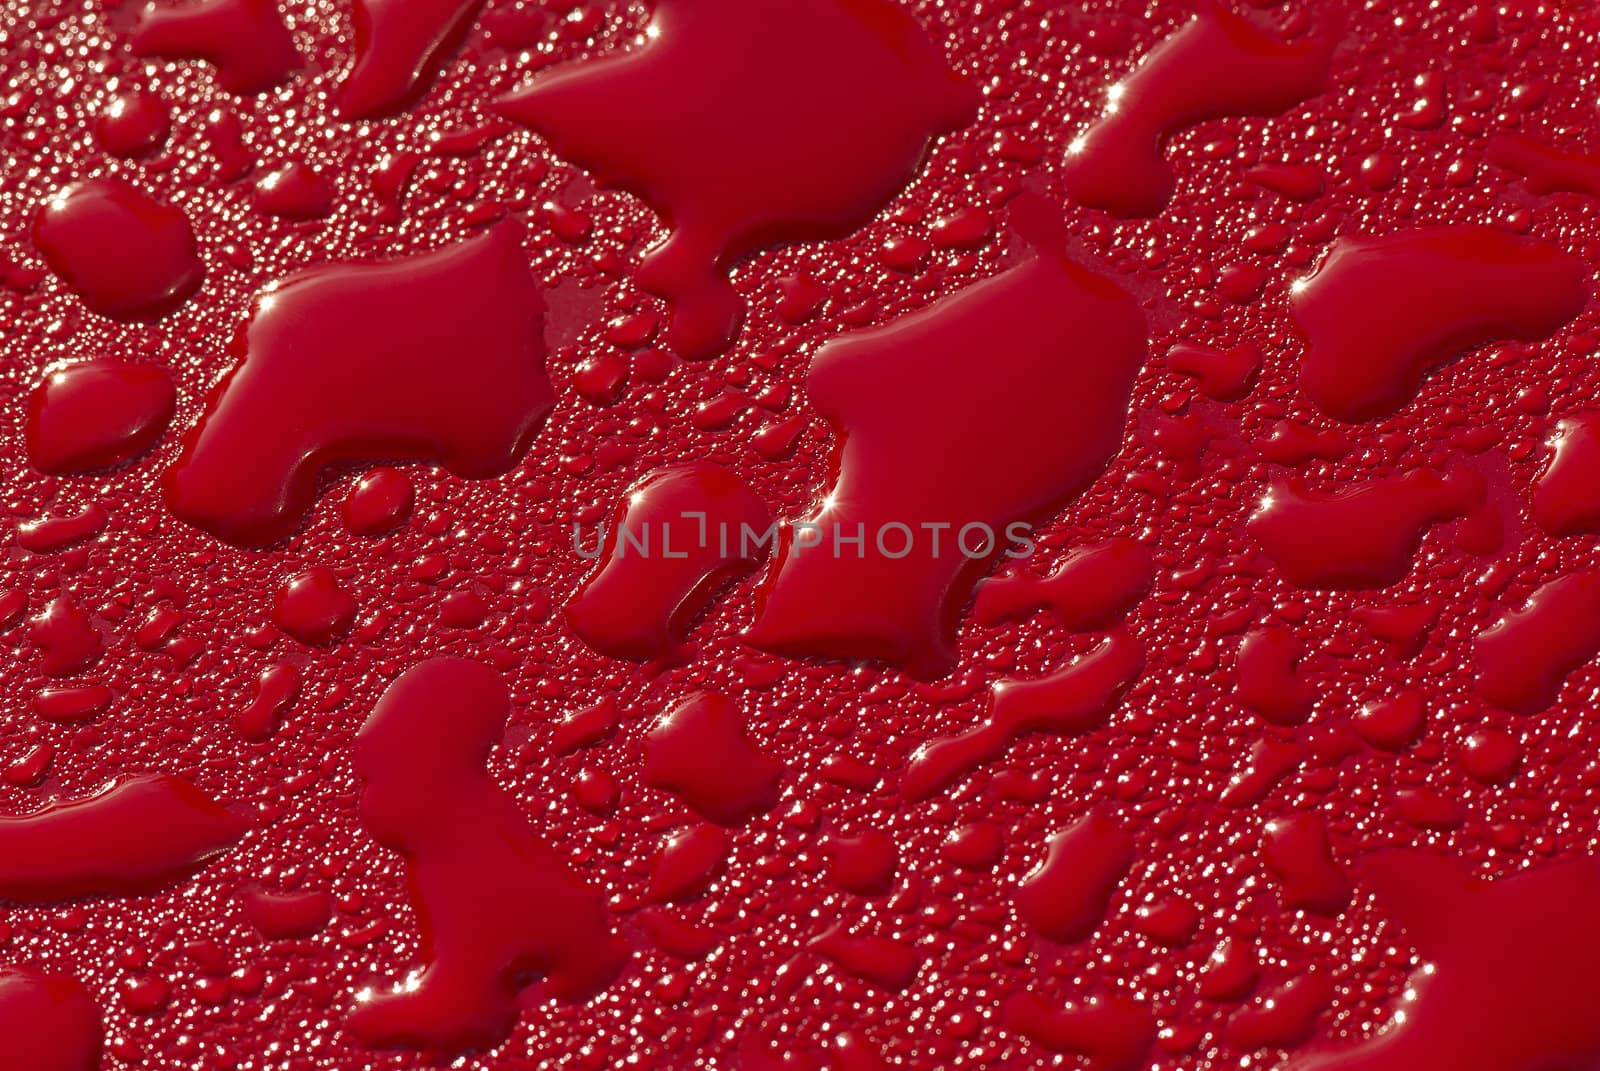 Raindrops on a red surface. A close up.